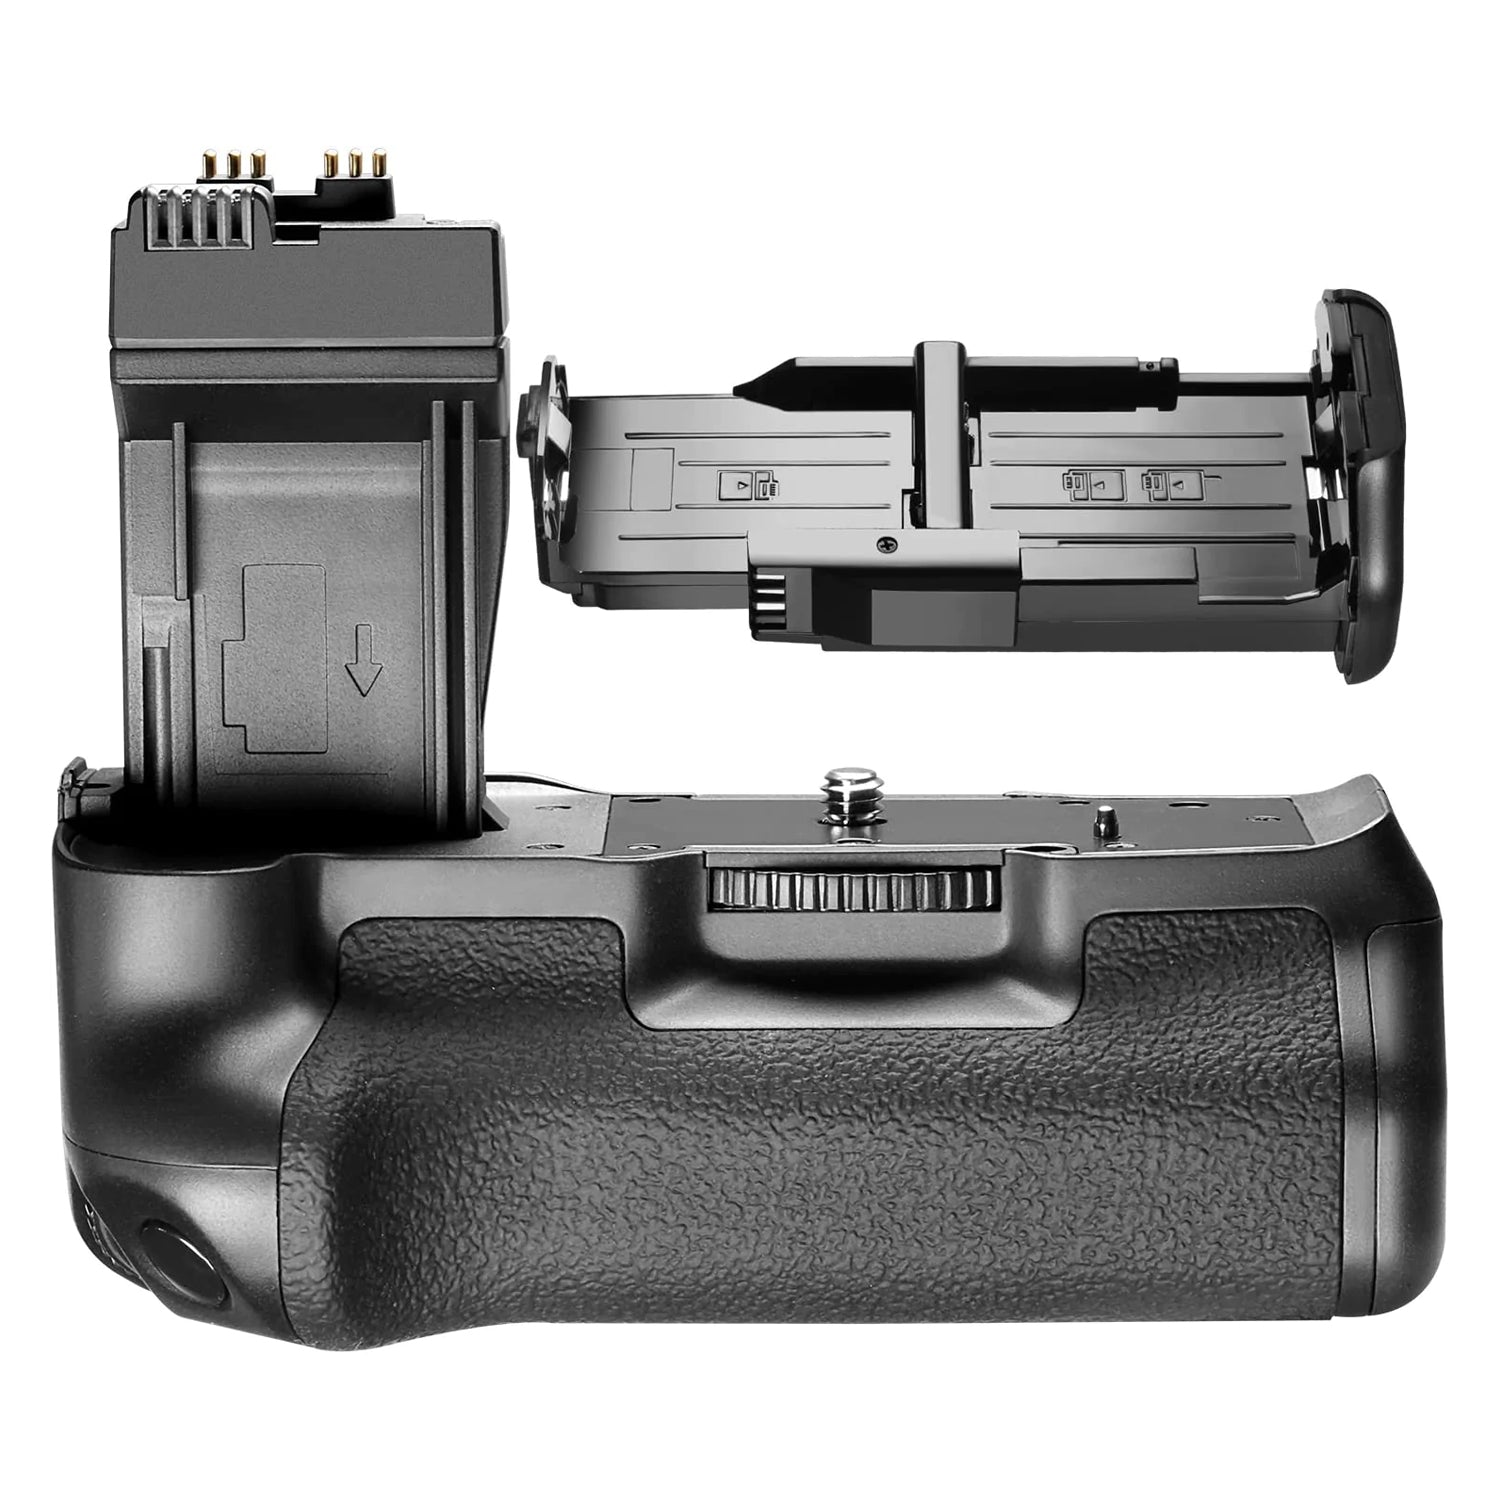 NEEWER BG-E8 Replacement Battery Grip for Canon EOS 550D 600D 650D 700D Rebel T2i T3i T4i T5i